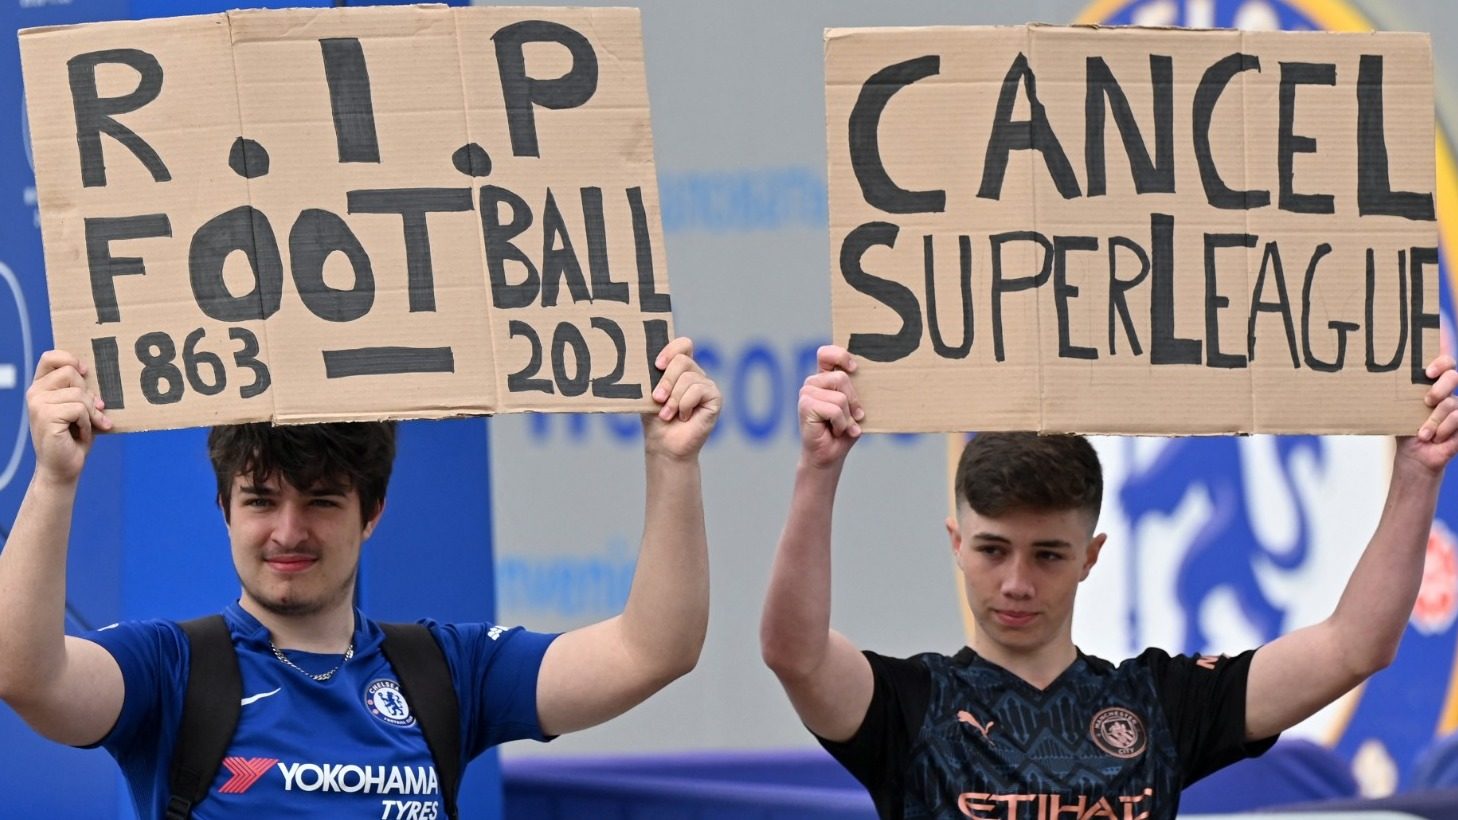 Football fans all over the world protested against the European Super League